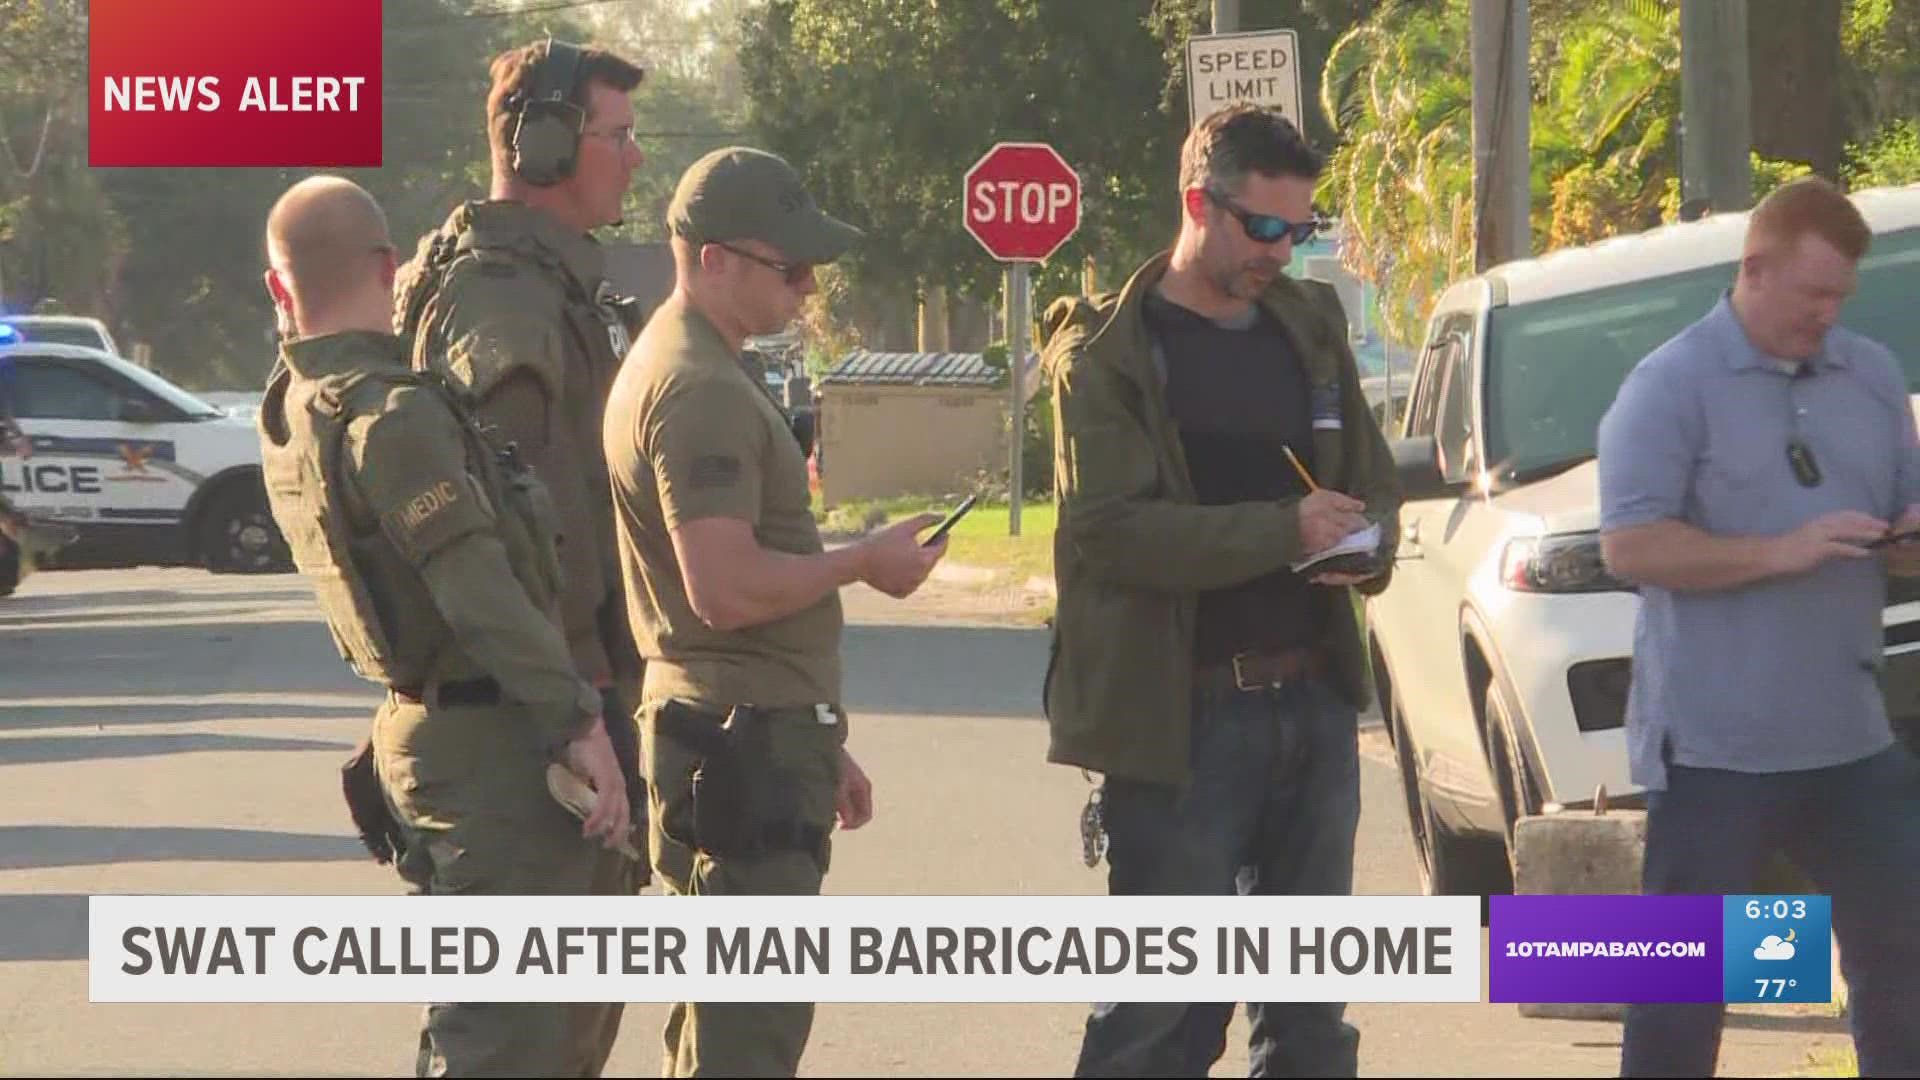 After officers spotted a car connected to area break-ins, a man ran into a nearby home and barricaded himself.